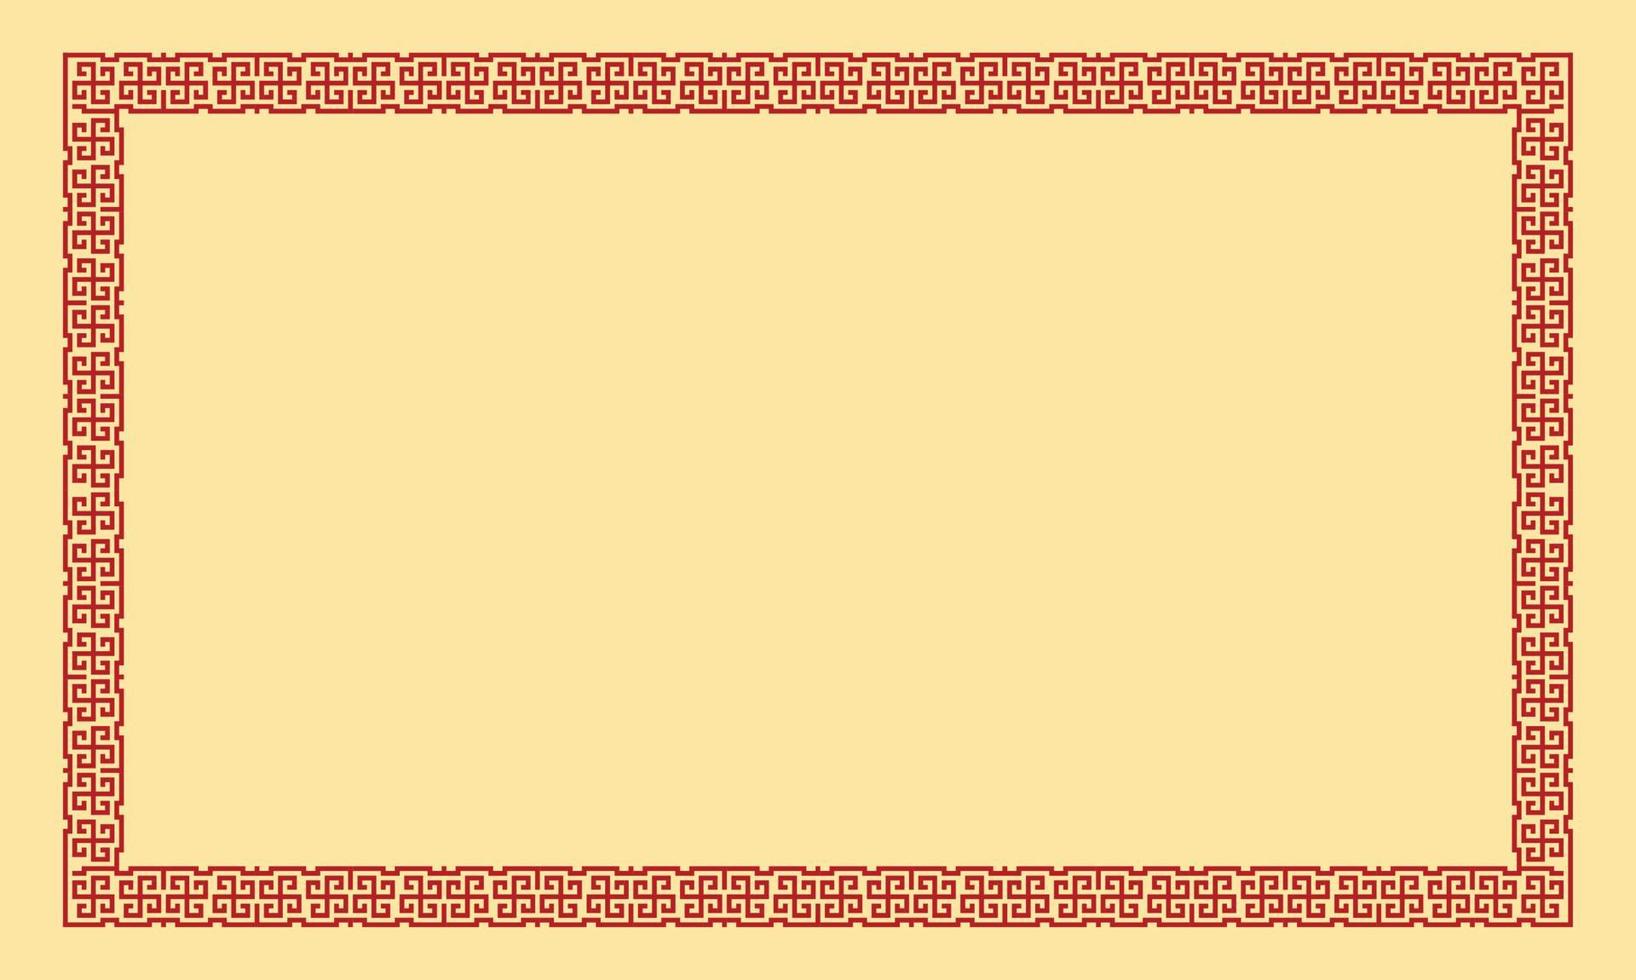 chinese new year background. vector